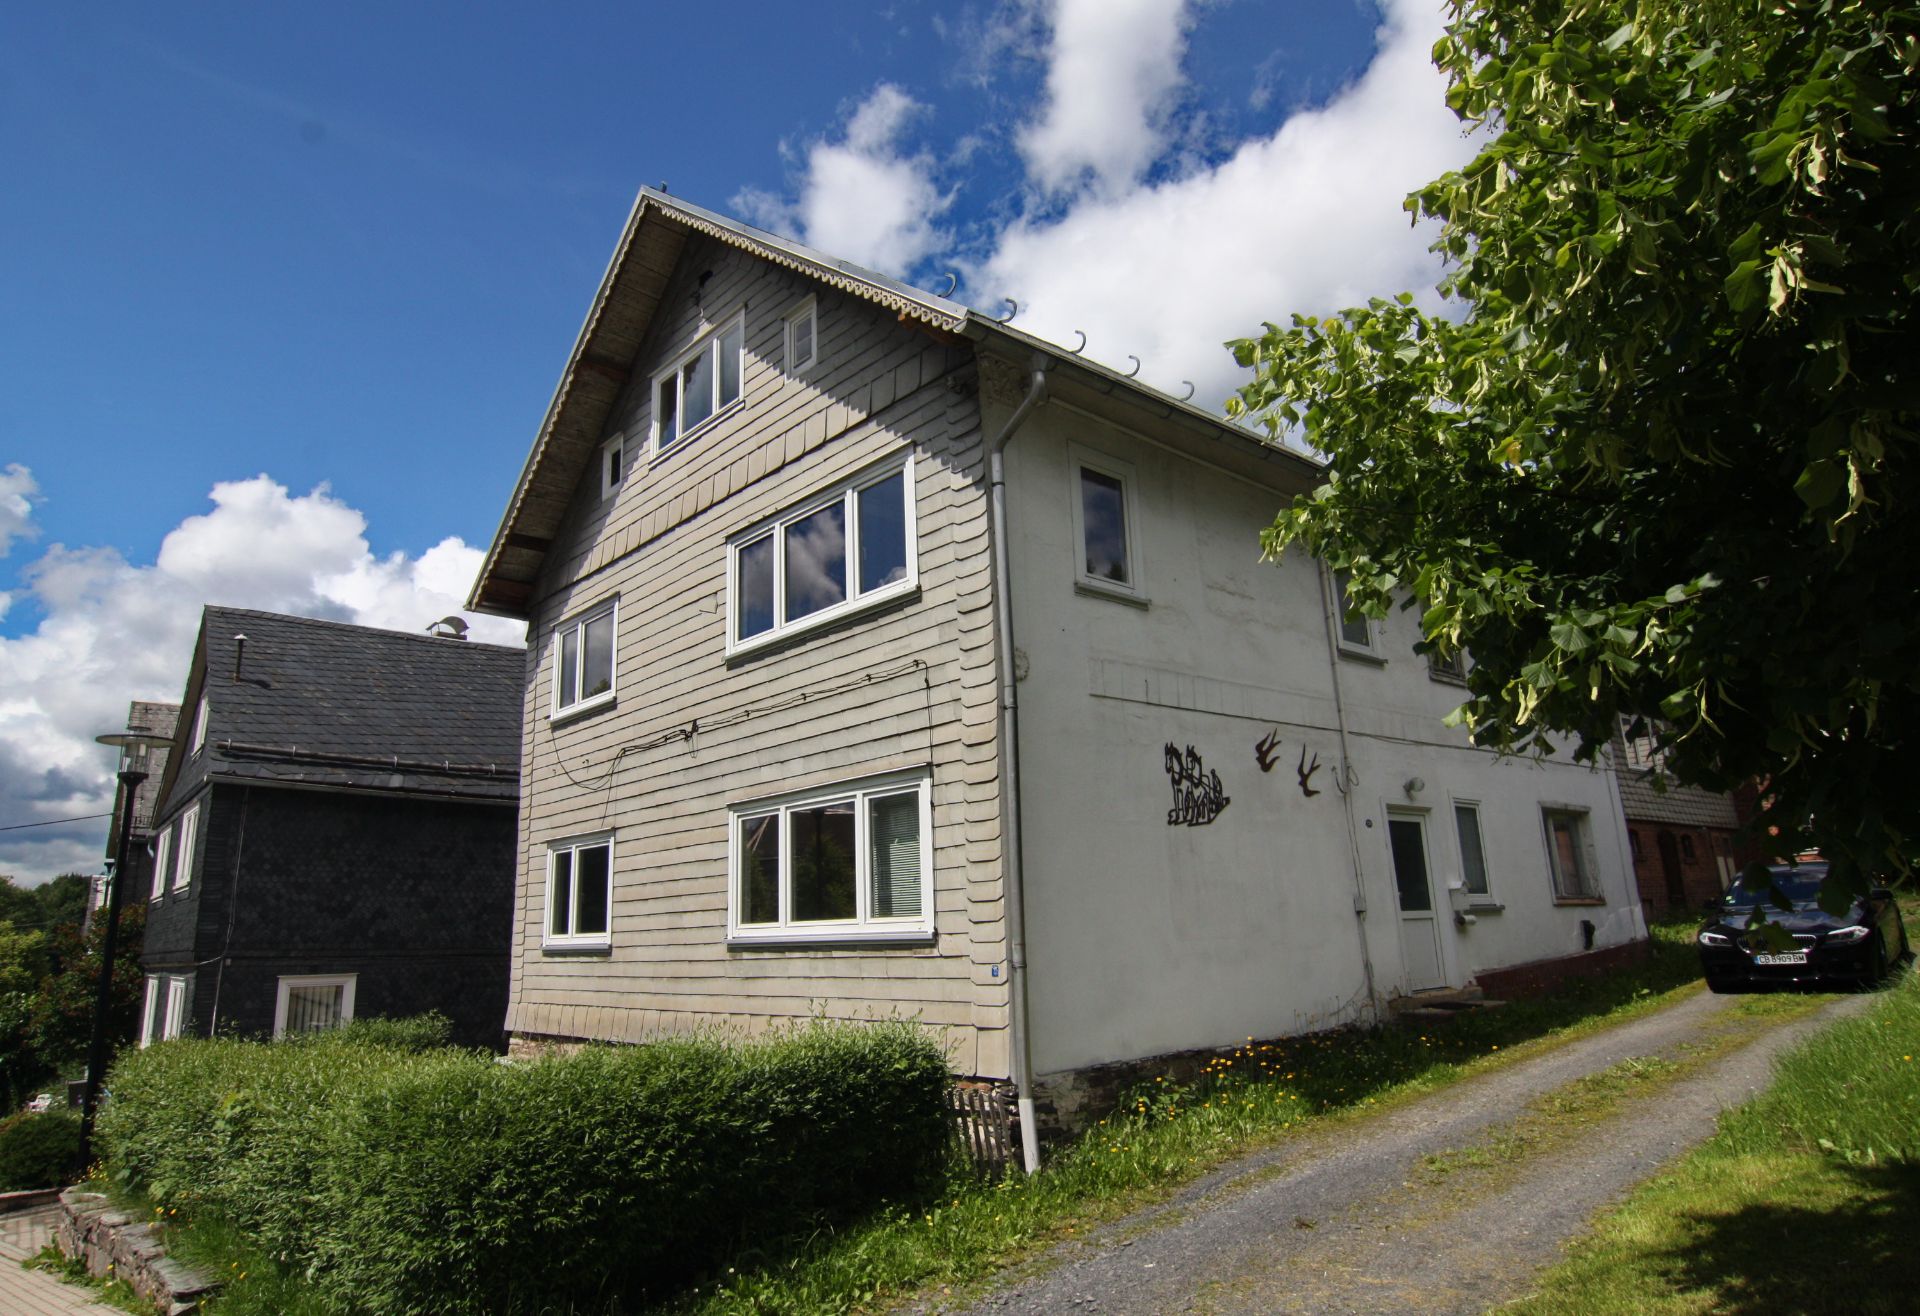 Meuselbach-Schwarzm.hle, Germany - HUGE 50 ROOM HOUSE(S) PUB AND WORKSHOPS 1/2 ACRE - Image 10 of 113